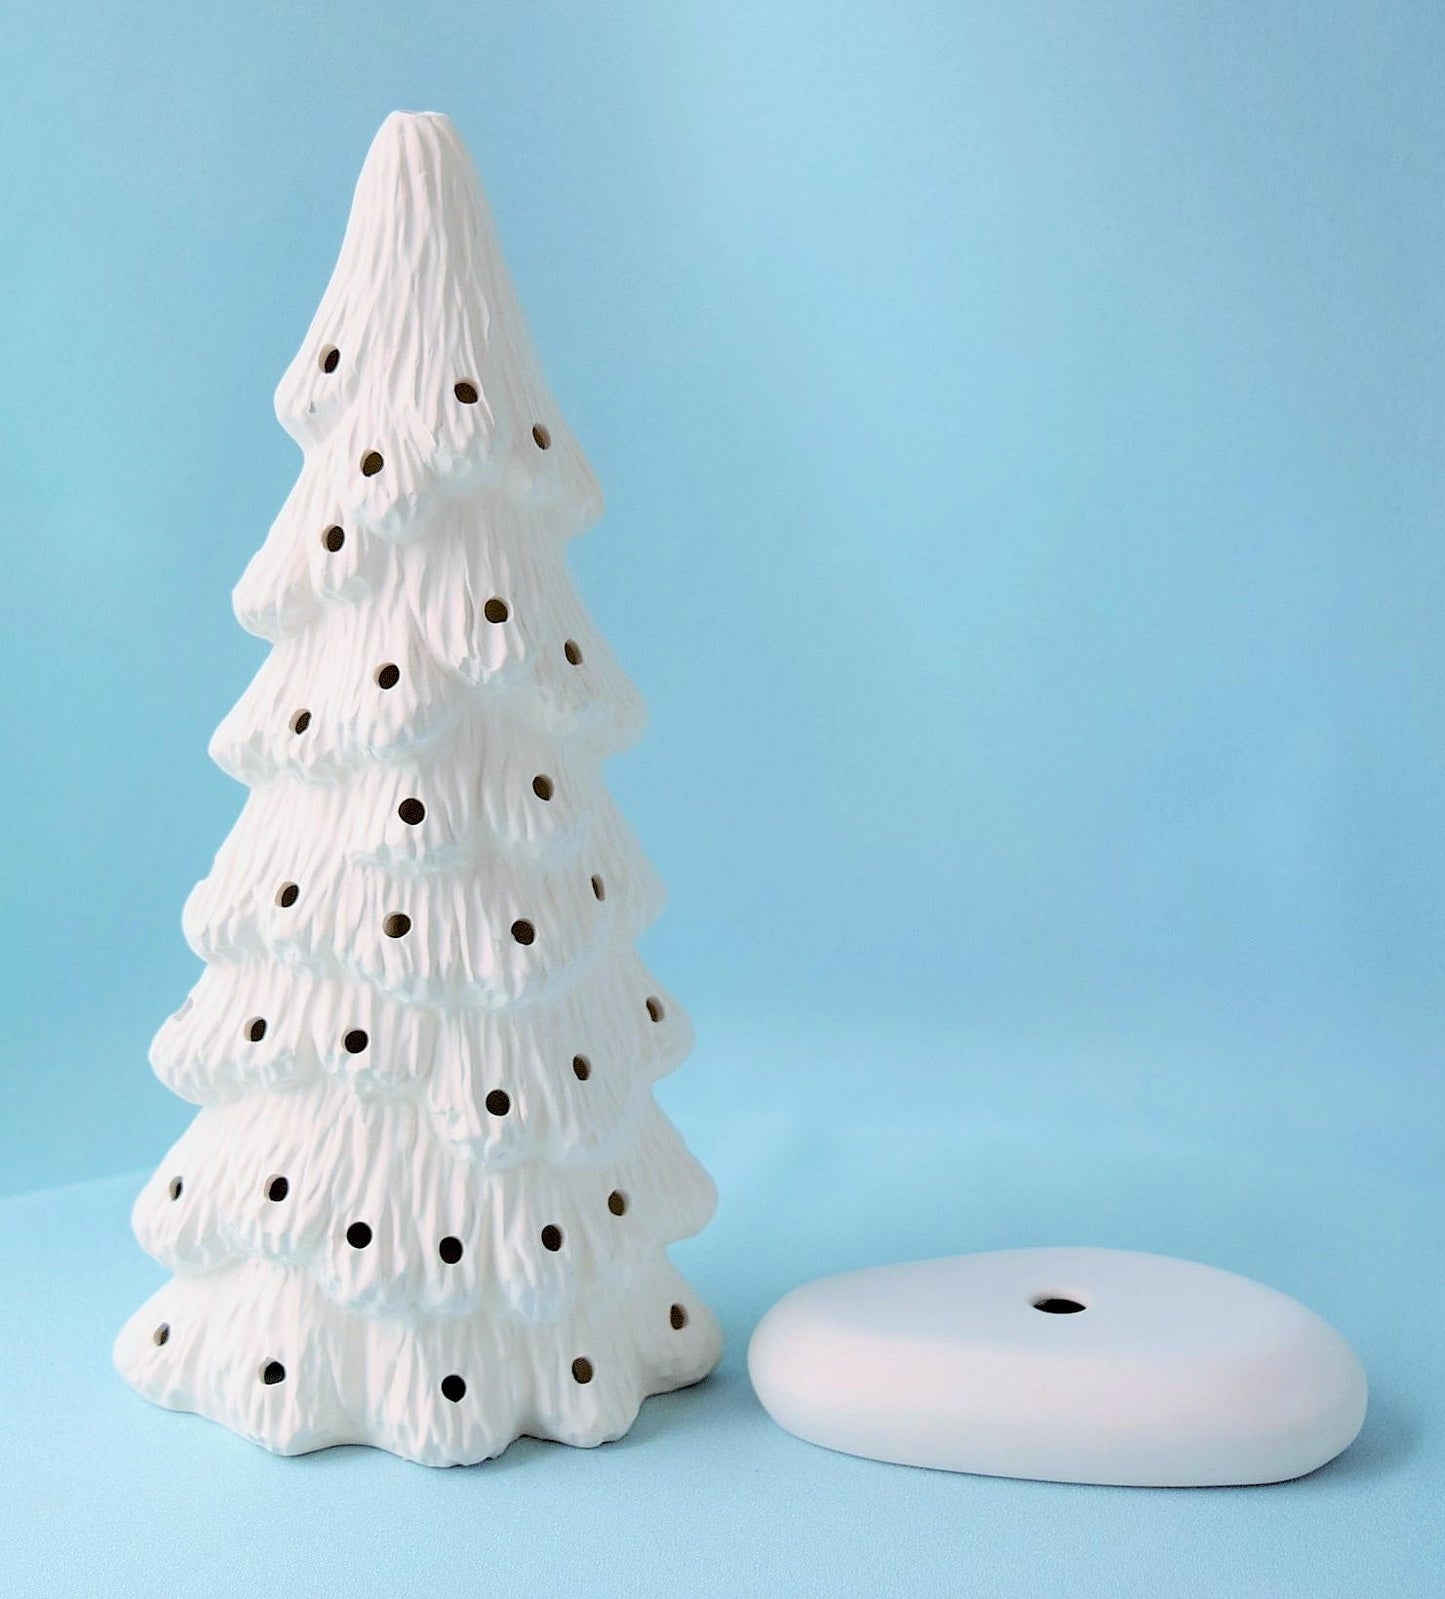 Ceramic Christmas tree in bisque - Slim Christmas Tree - 9 inches tall -  Tree - Ready to paint - Painting project - DIY ceramics